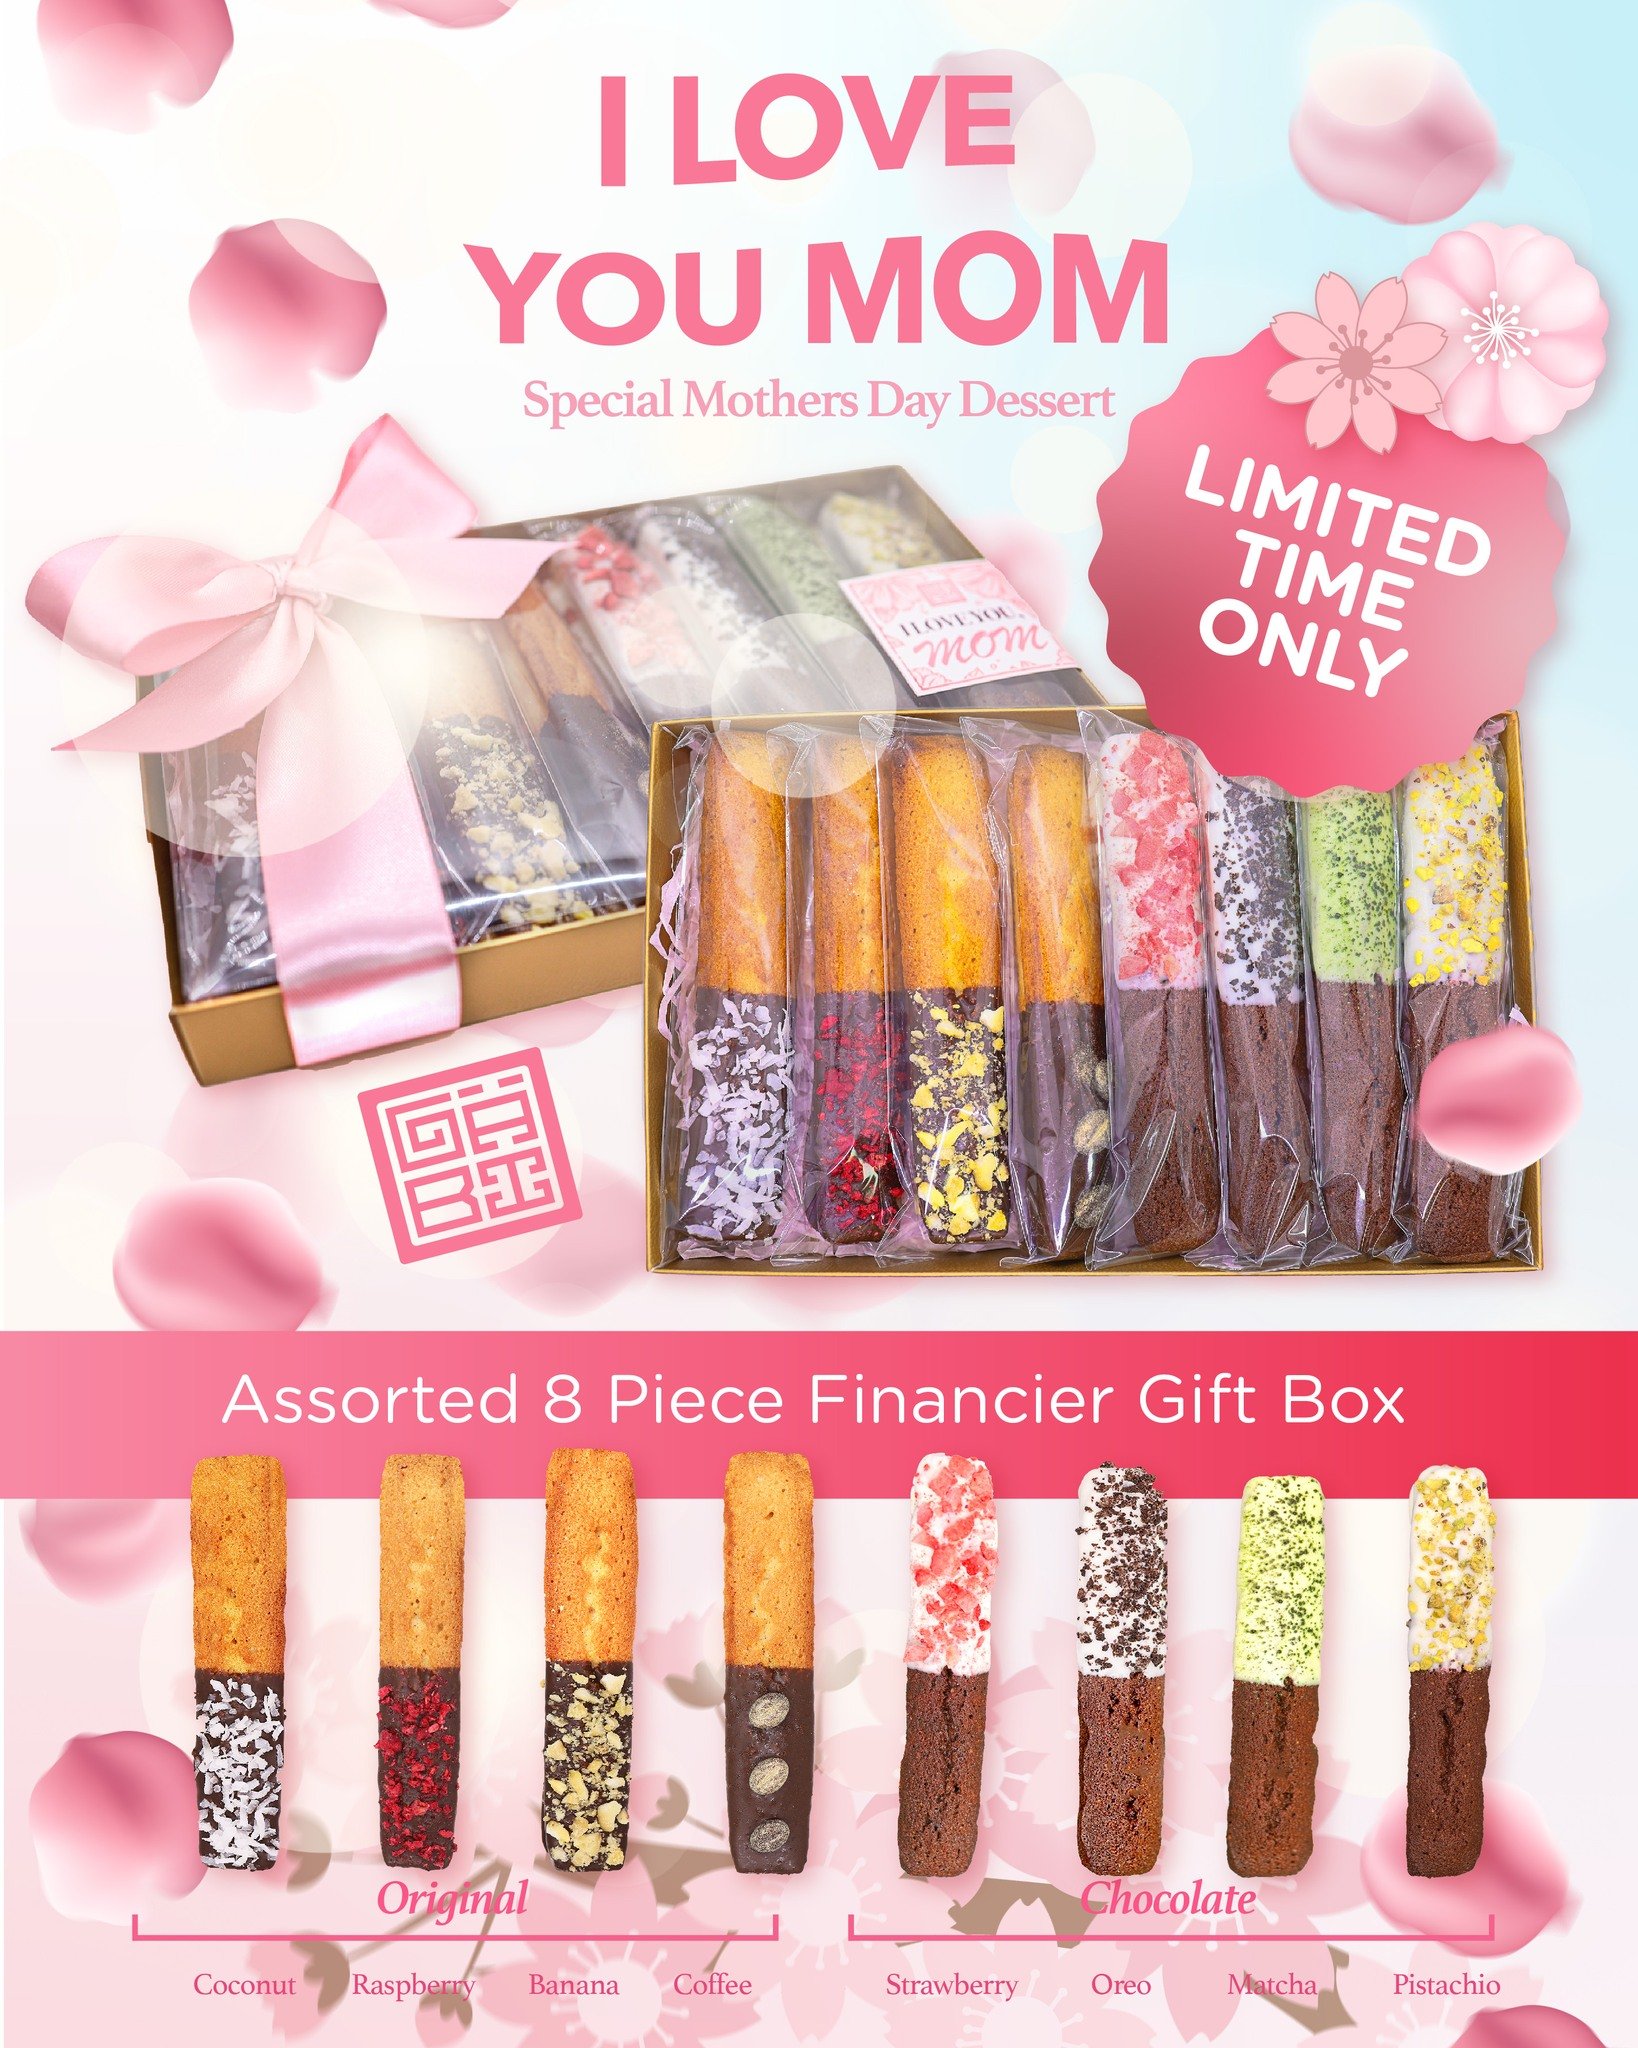 🤱🌷🌷 We love you MOM! 🎀 For a limited time only, give the wonderful gift of a special 8-piece Financier Gift Box Set. Coconut, Raspberry, Banana, and Coffee in original and Strawberry, Oreo, Matcha, and Pistachio dipped in chocolate. 💐💝 Now offe